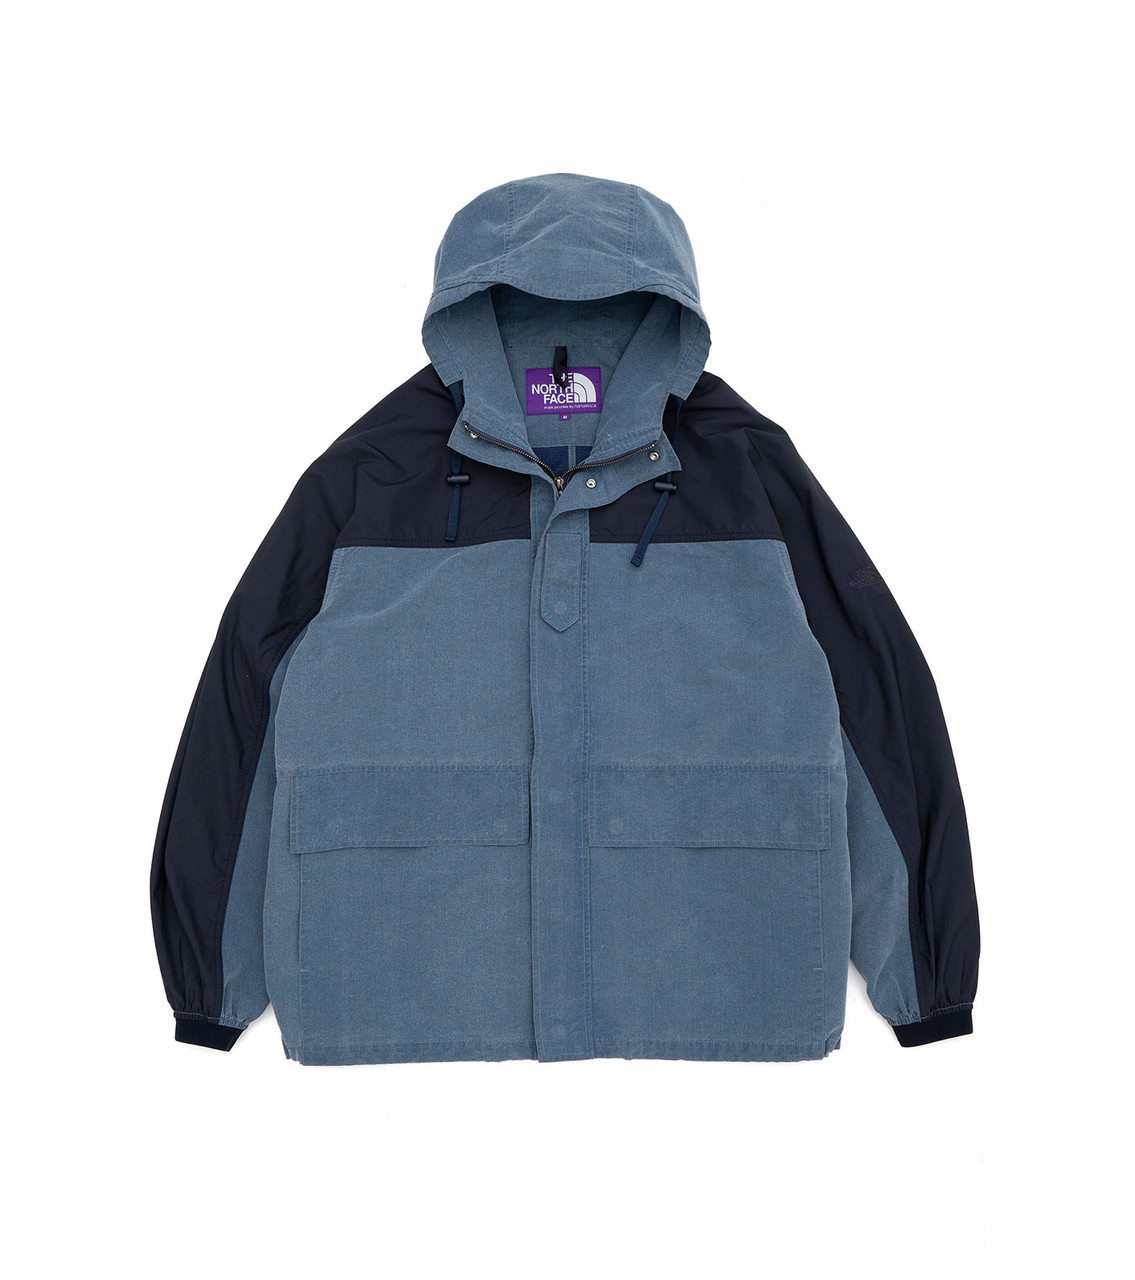 THE NORTH FACE PURPLE LABEL Indigo Mountain Wind Parka NP2253N 6307